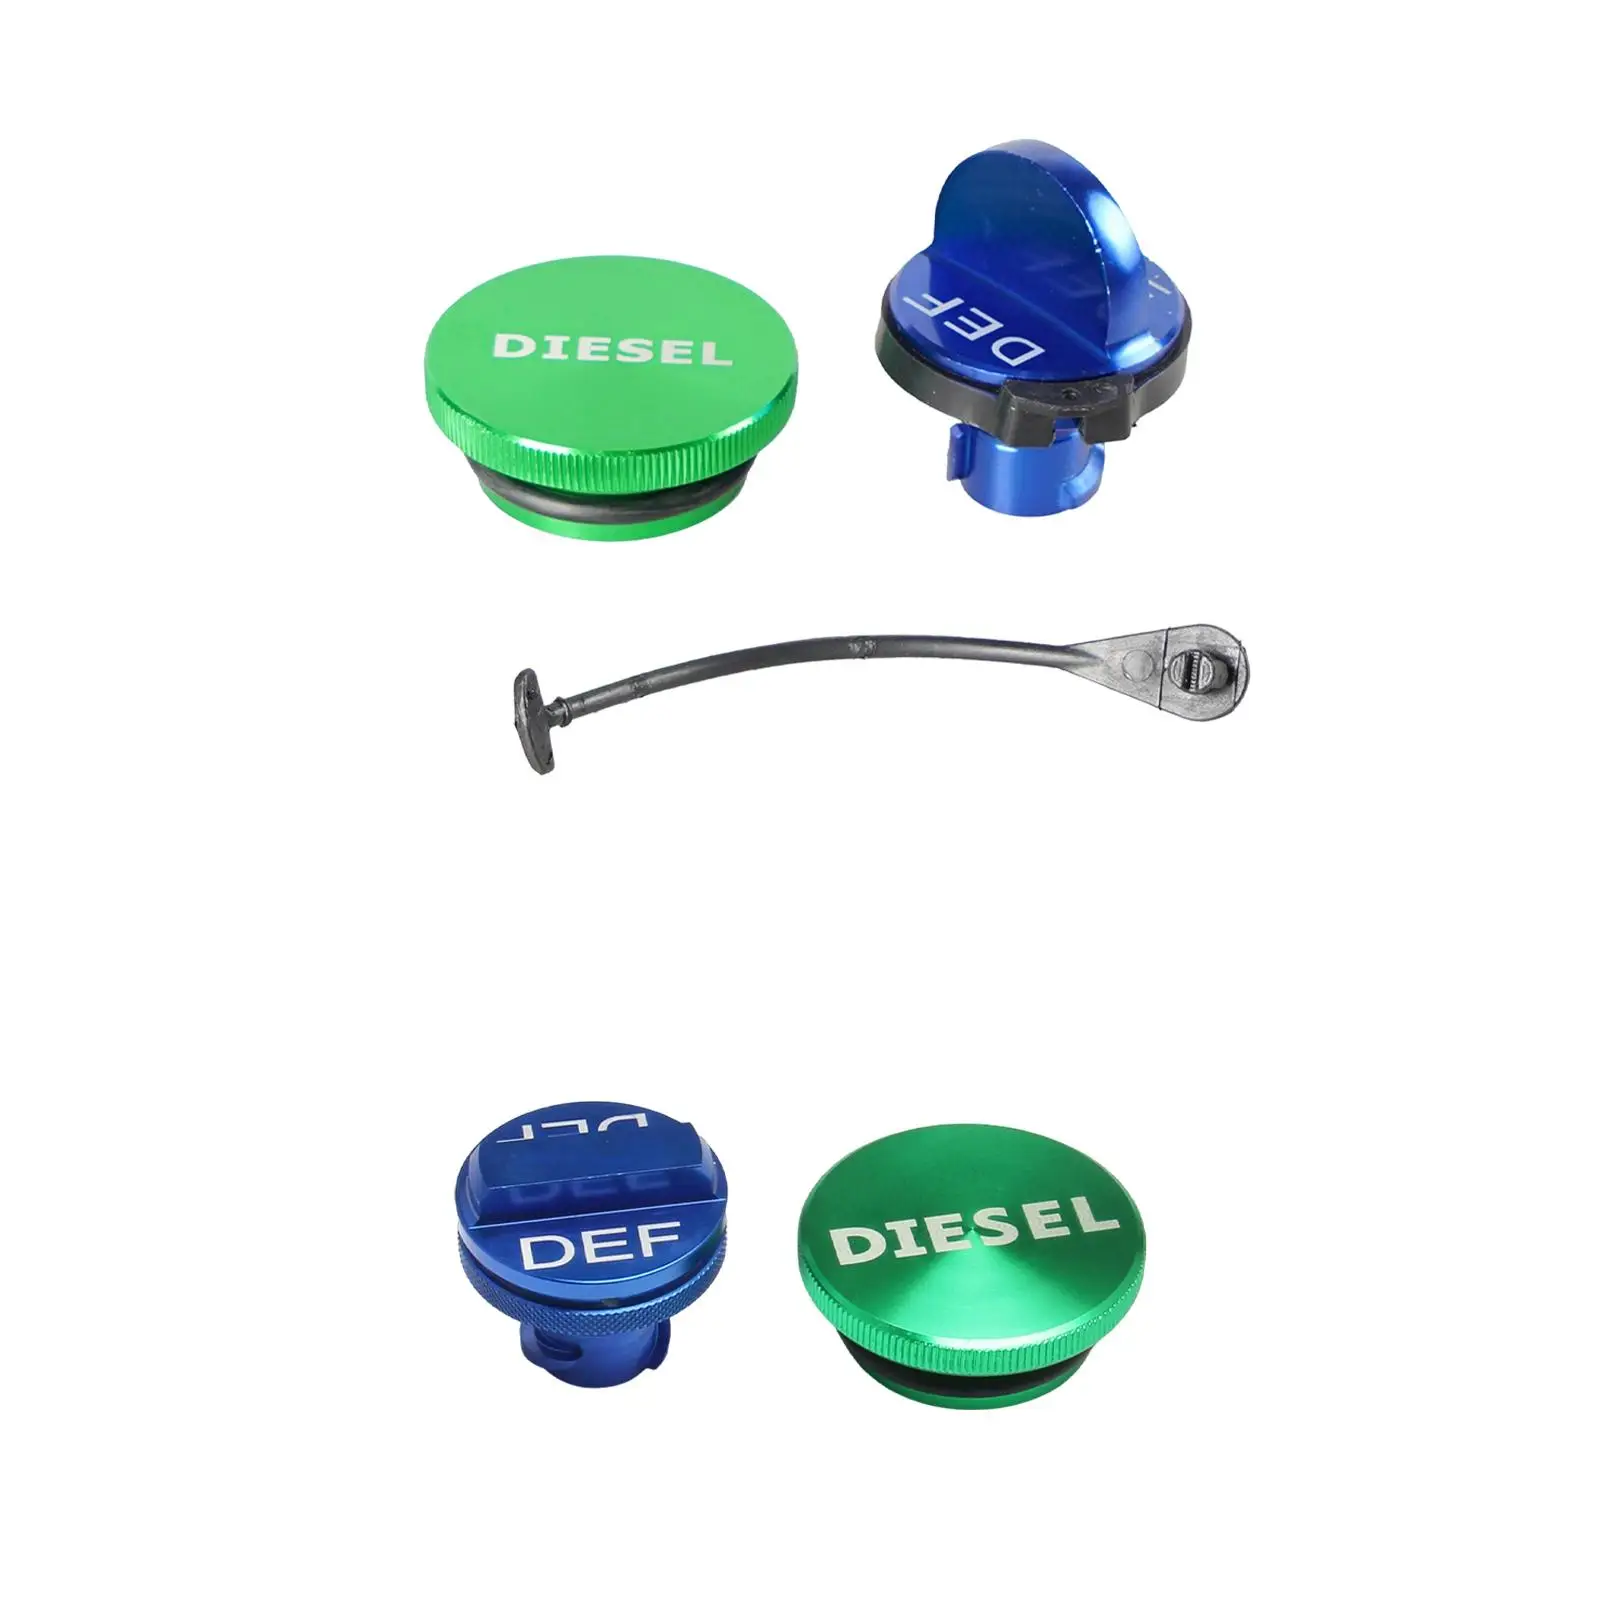 2 , Truck Accessories Replacement Parts Def  Fuel Tank Caps Fit for 013 1500 2500 3500  Trucks